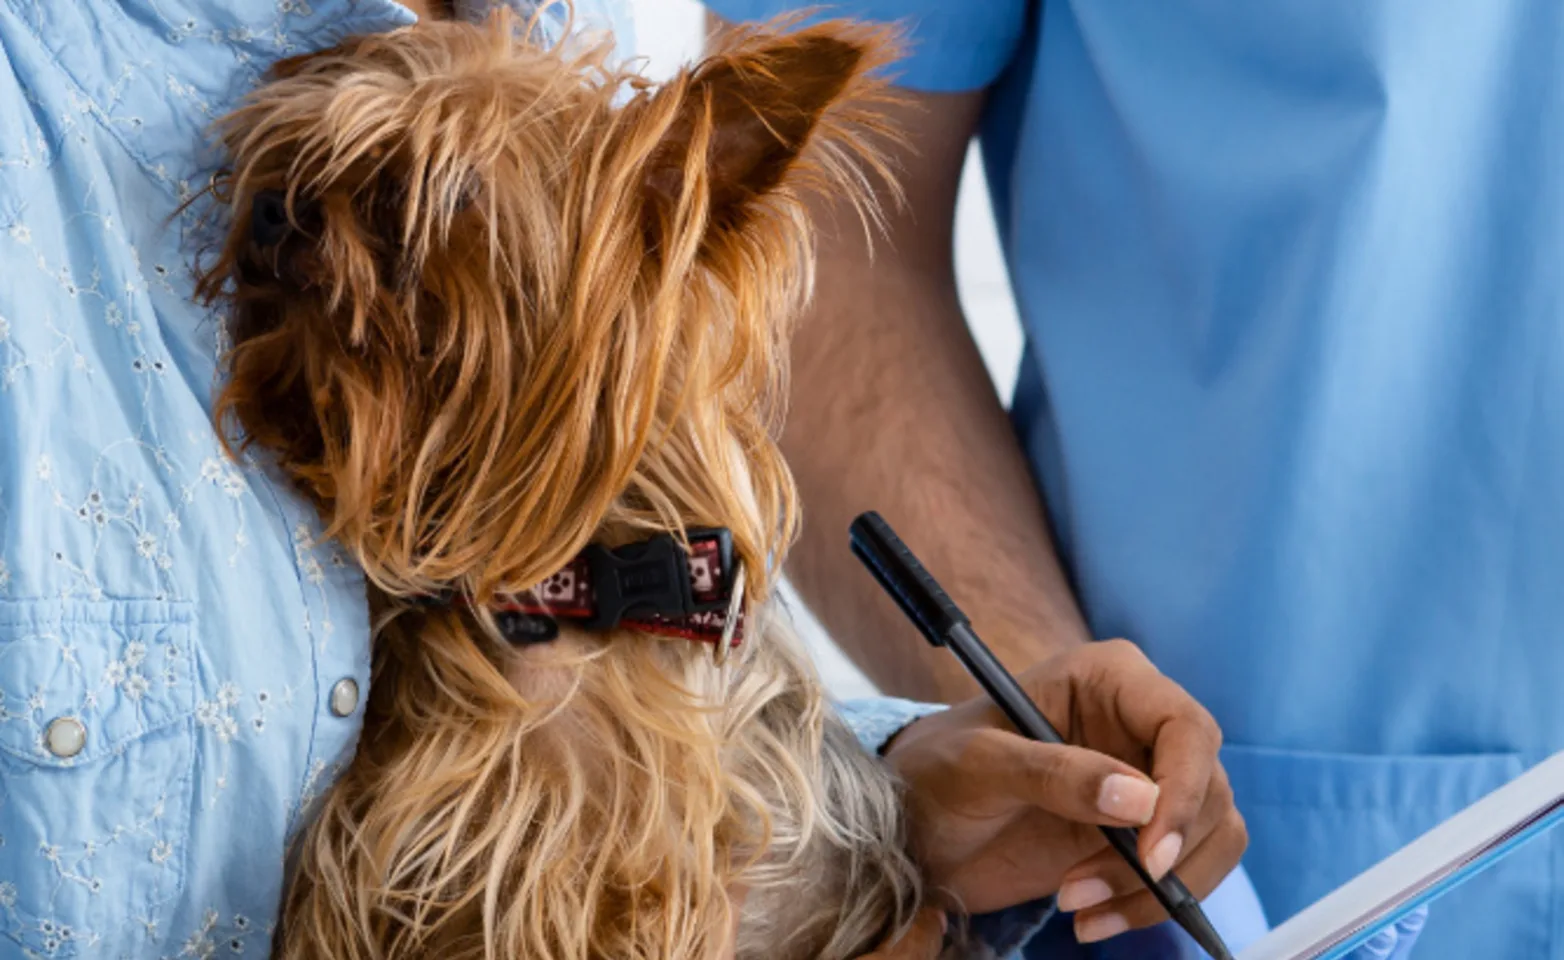 A photo of a Yorkie being checked out by a veterinary professional while being held by its pet parent